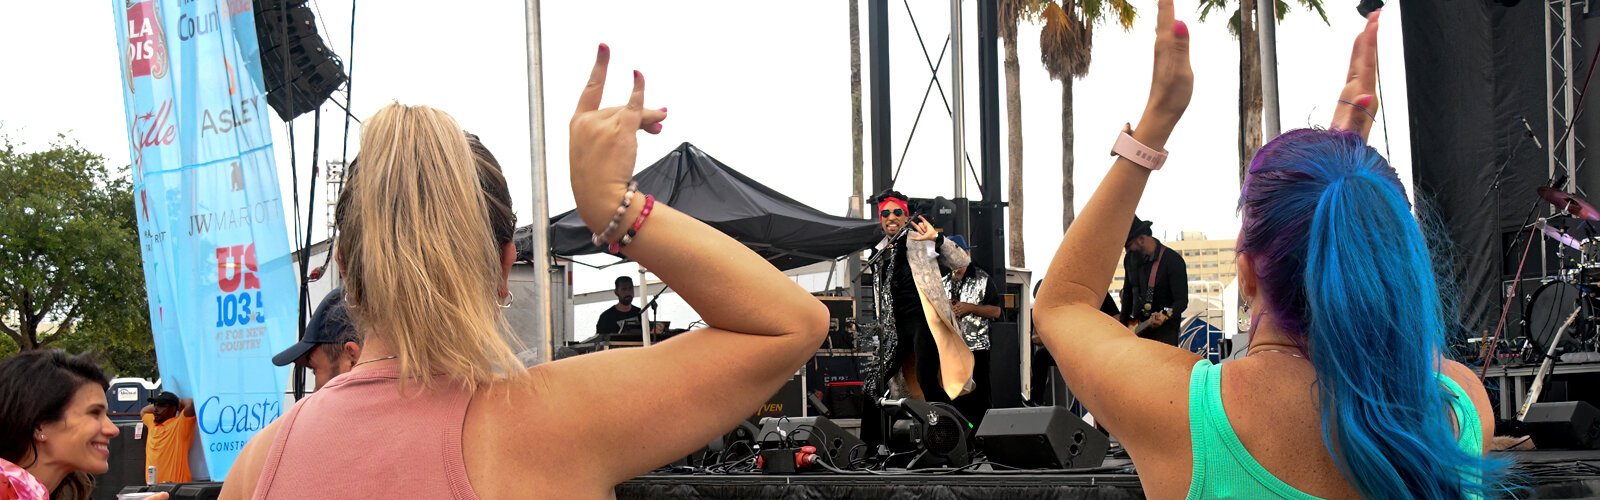 Prince tribute artist Sir Jac gestures “I love you” in American sign language to his fans at the Tampa Riverfest live concert on Saturday evening.